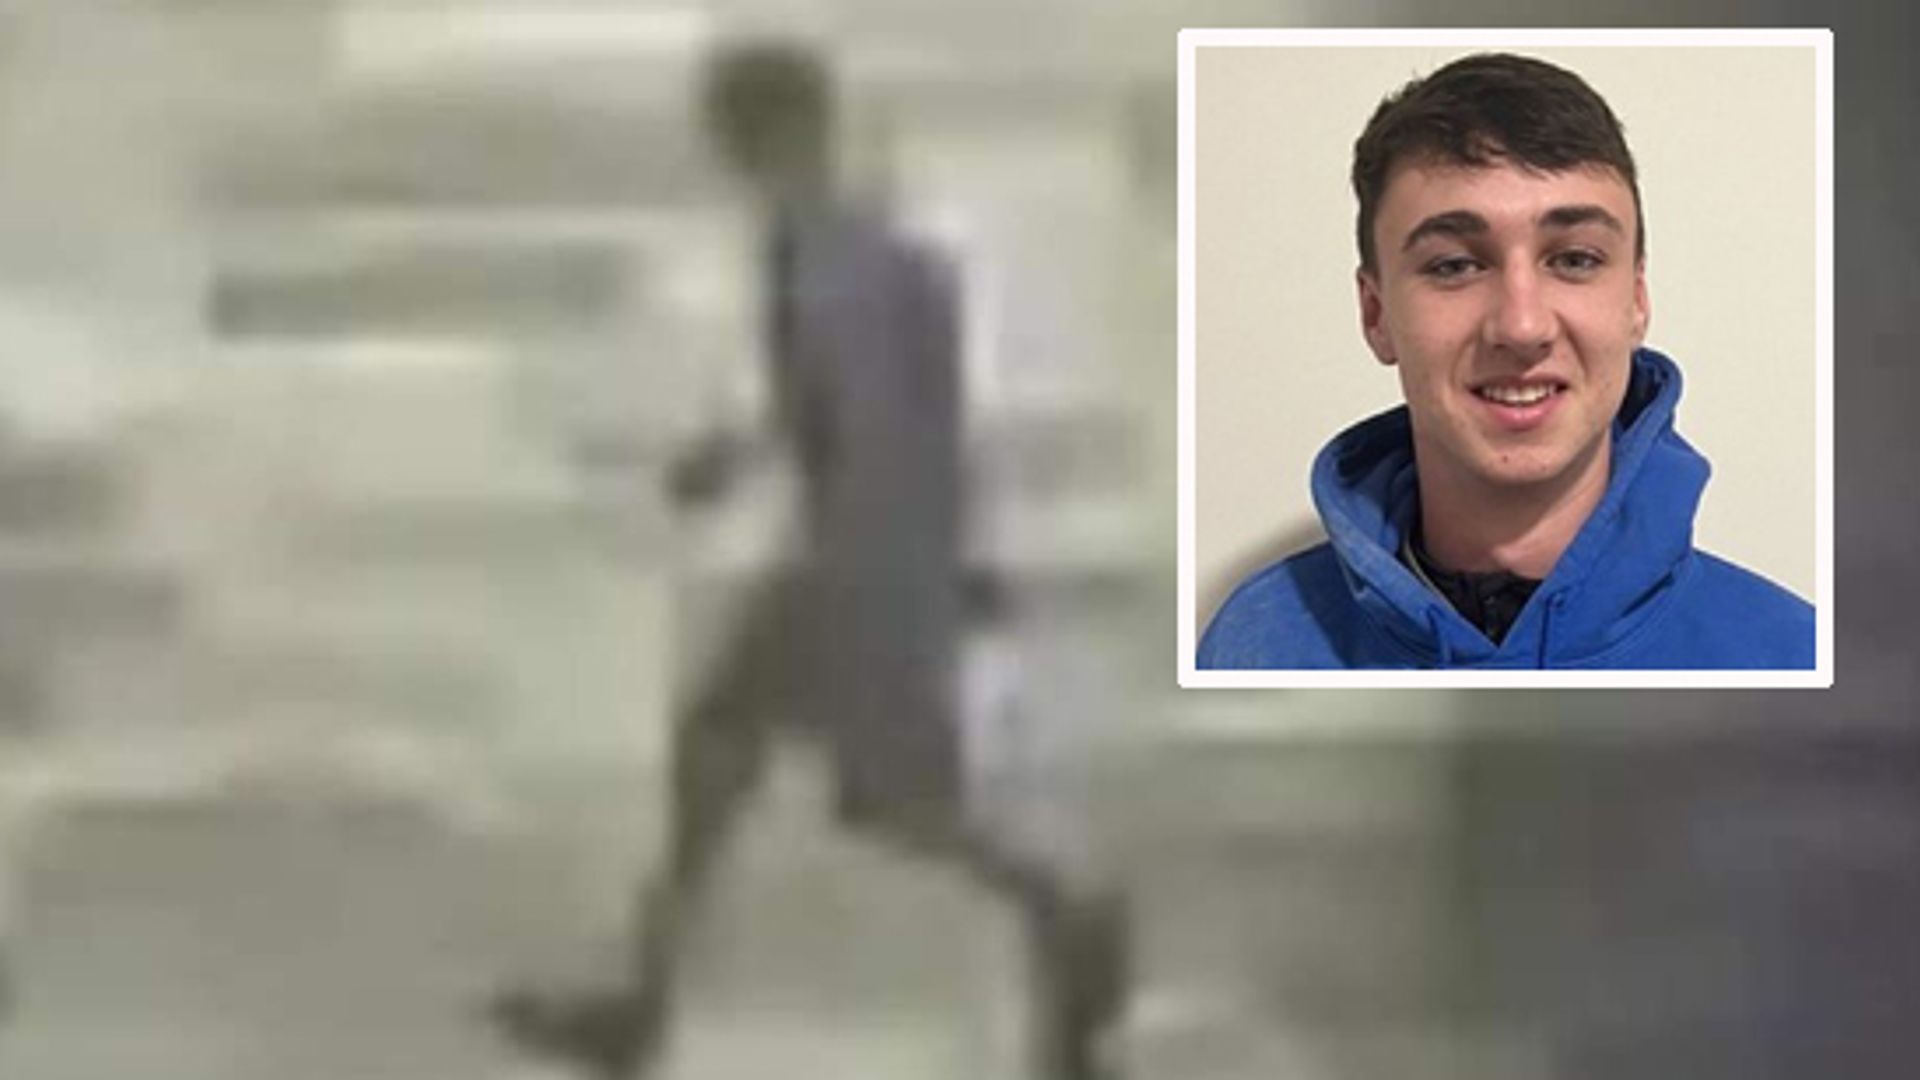 Jay Slater's dad says police keeping family in dark - as they share new CCTV image 